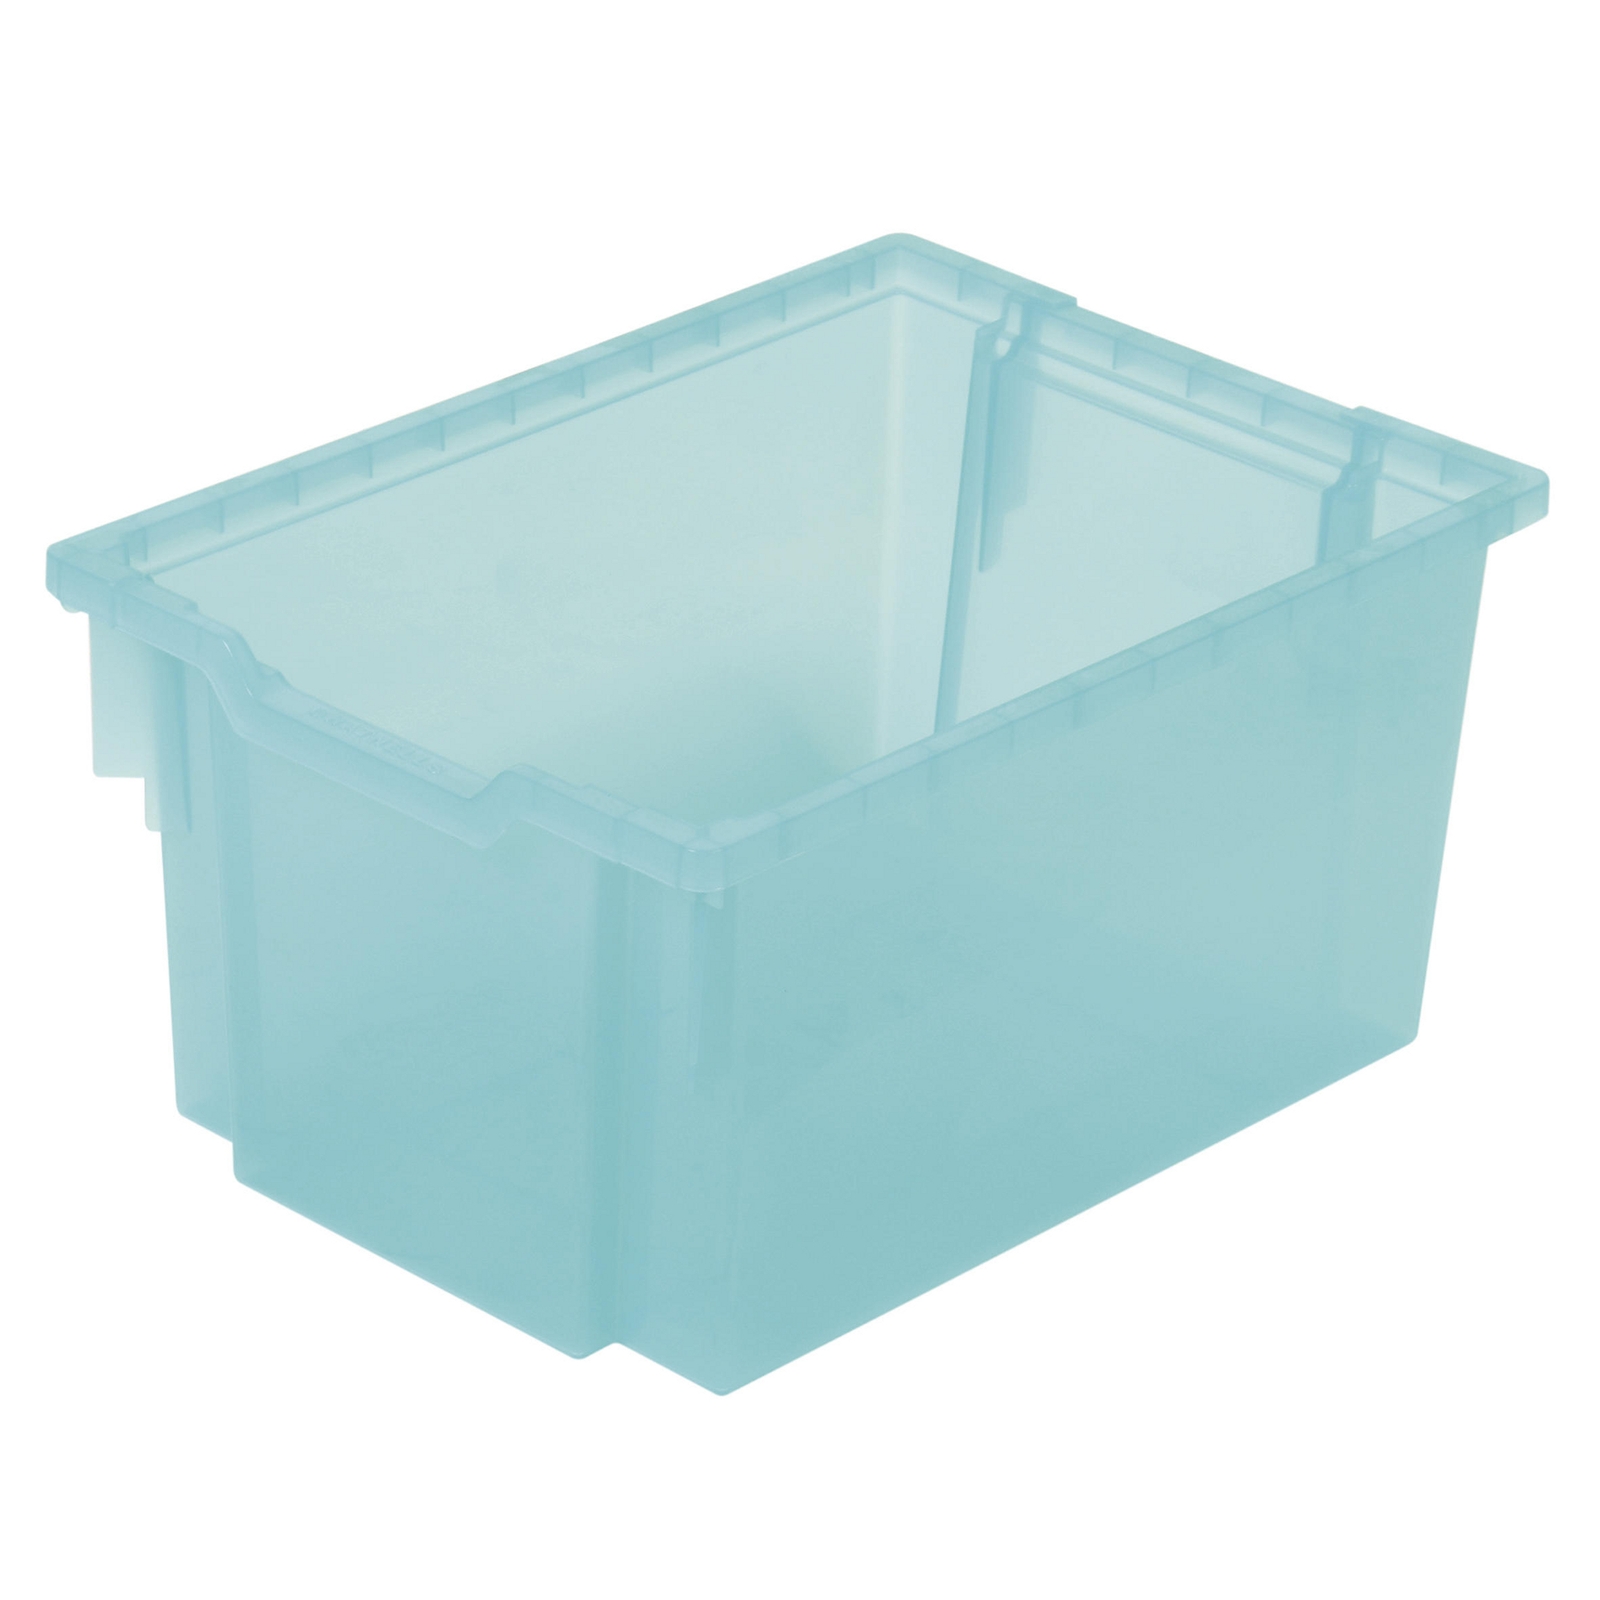 Gratnell Kiwi Jelly Extra Deep Antimicrobial Translucent Tray - W312 x D427 x H225mm - Each